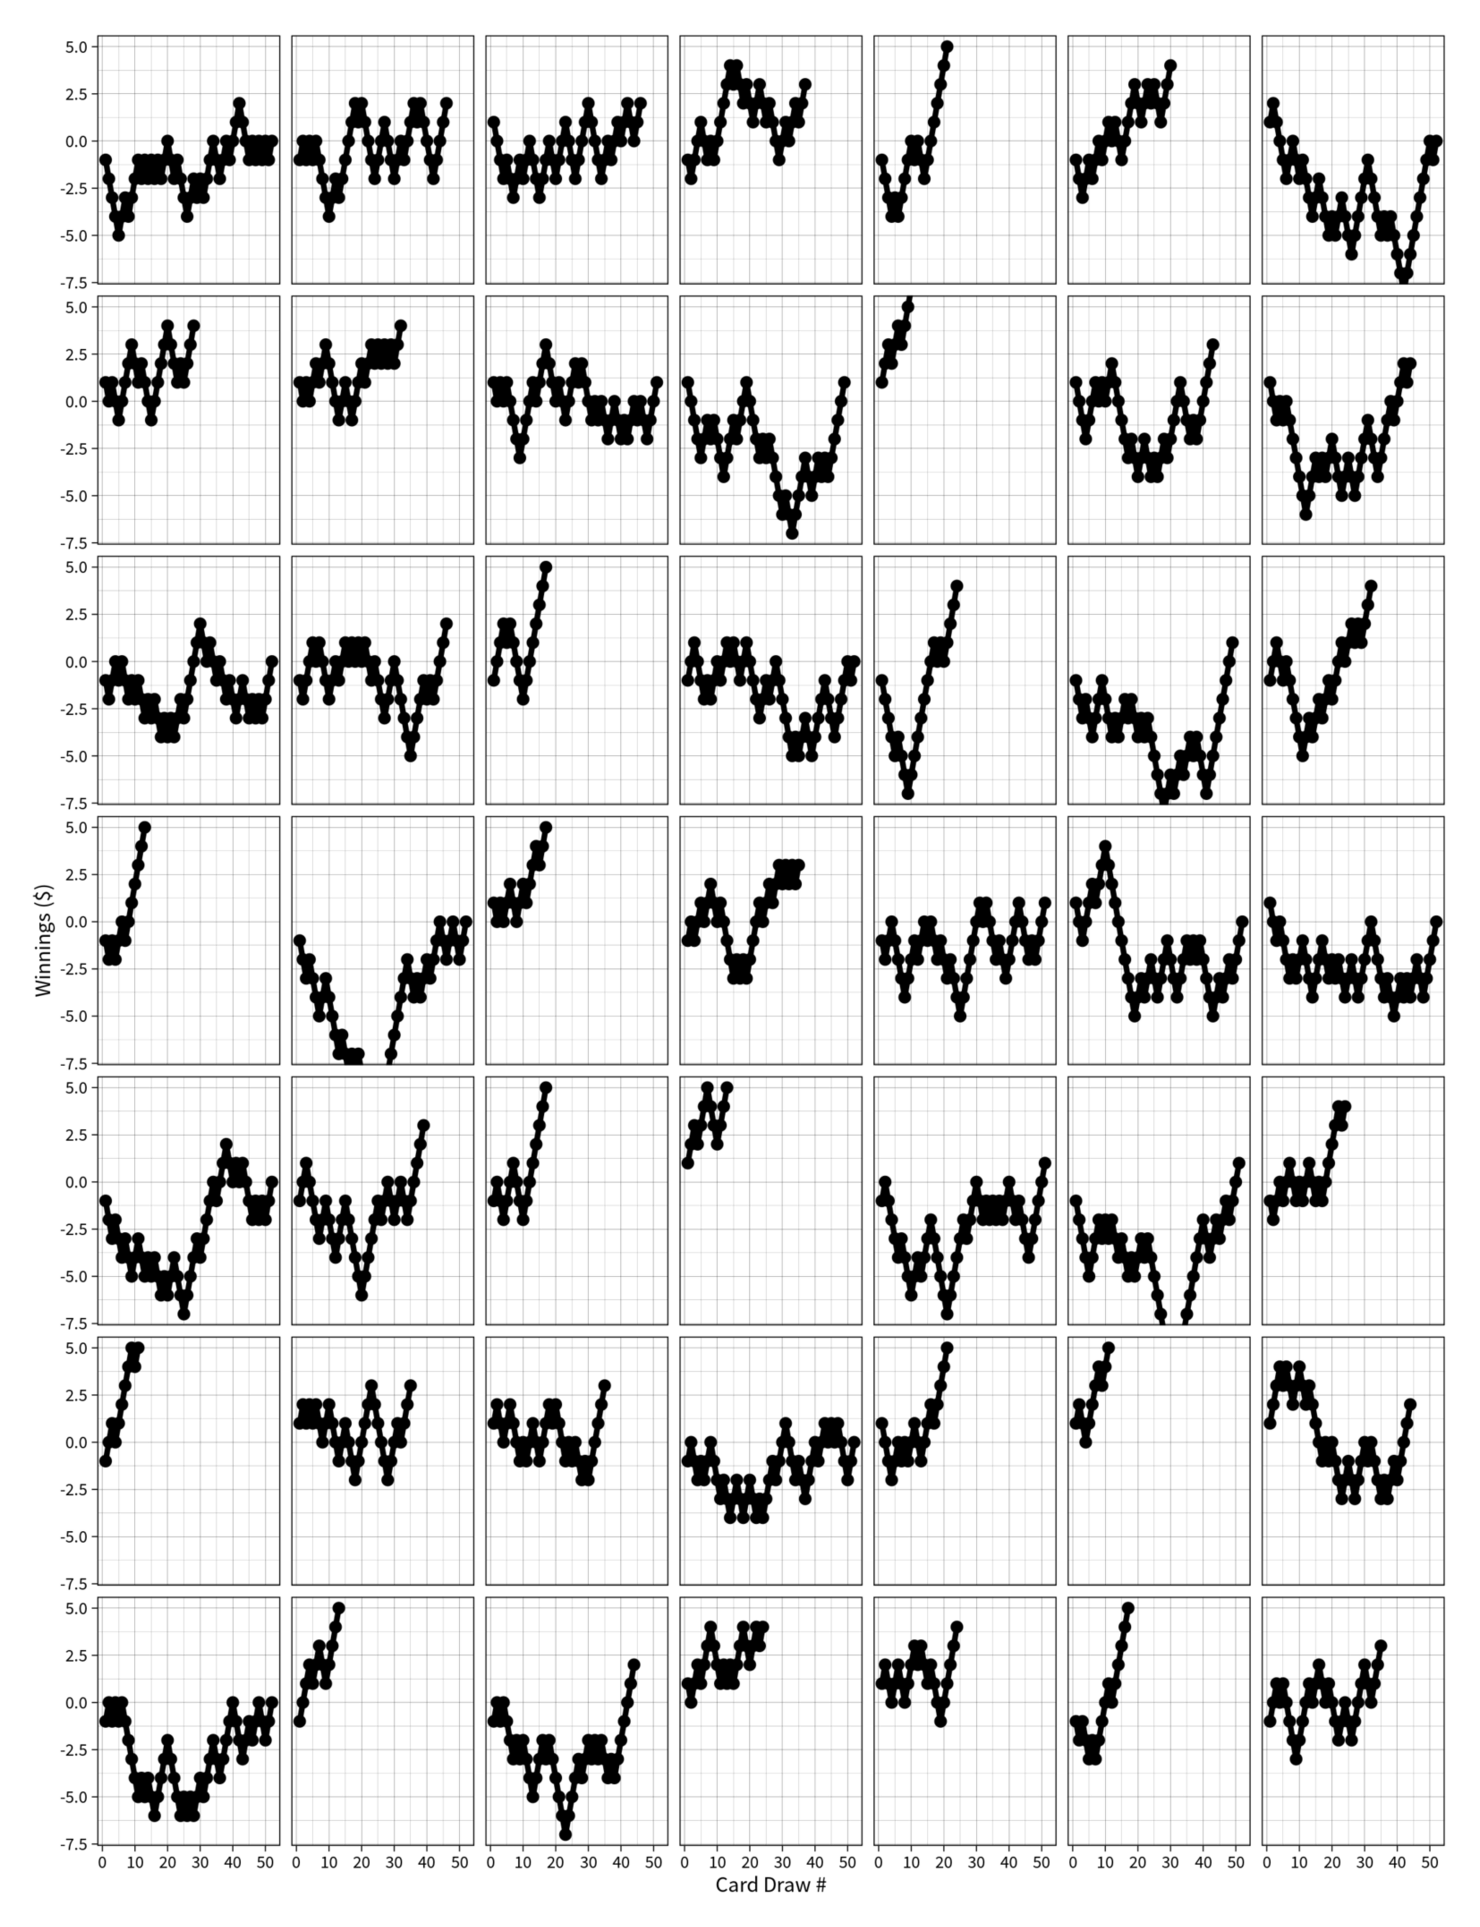 Simulation of winnings over a sample of 49 games of (26,26) using the optimal-stopping strategy. (One can see the implicit decision boundary where trajectories stop.)